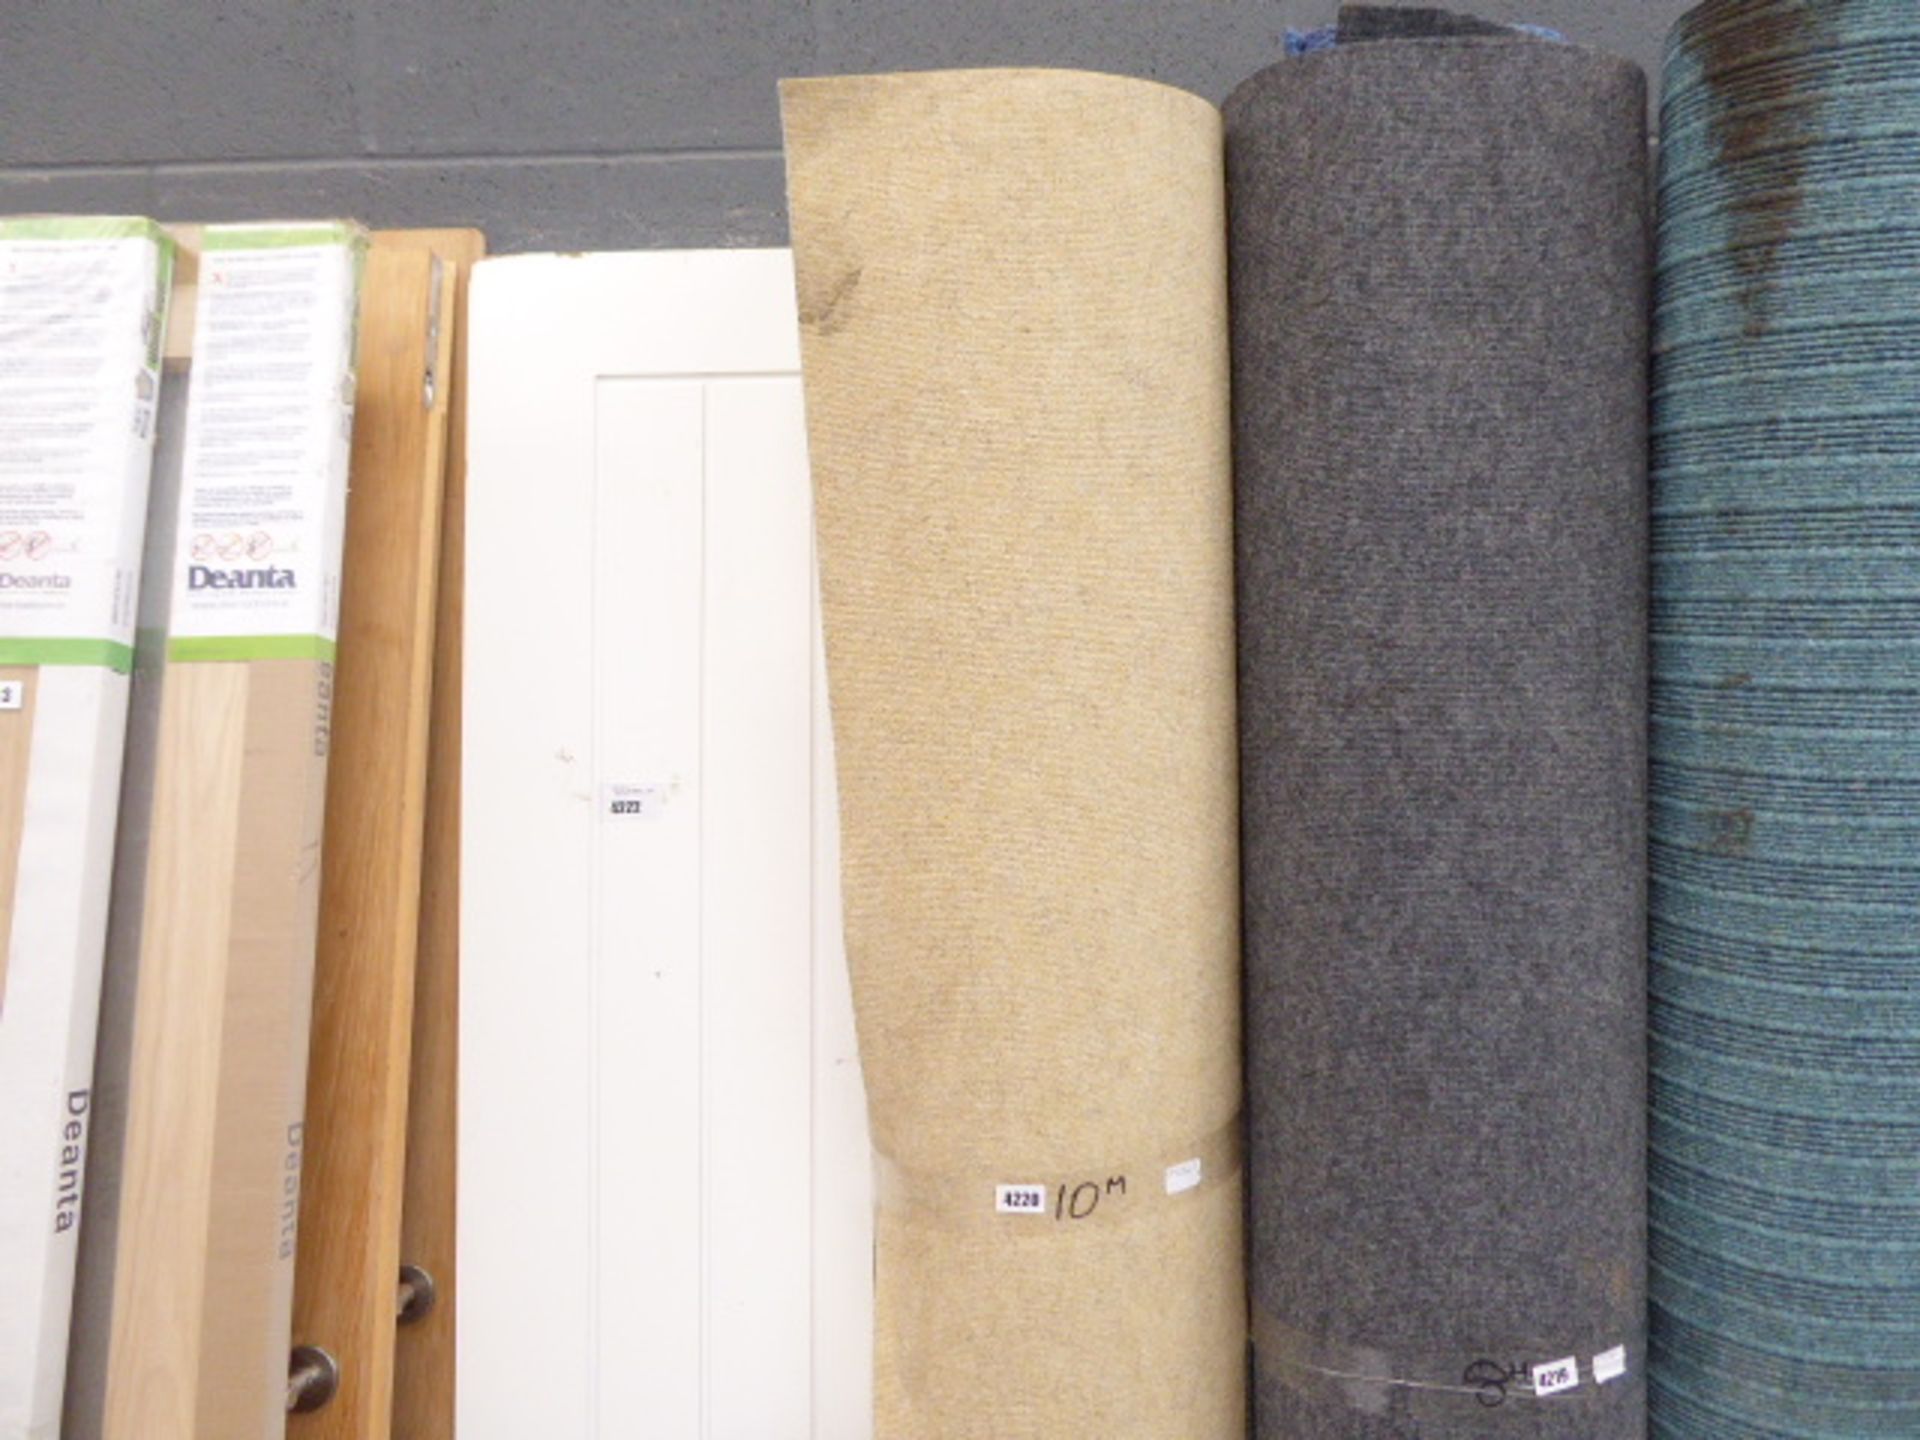 14) 10m roll of commercial carpet in beige